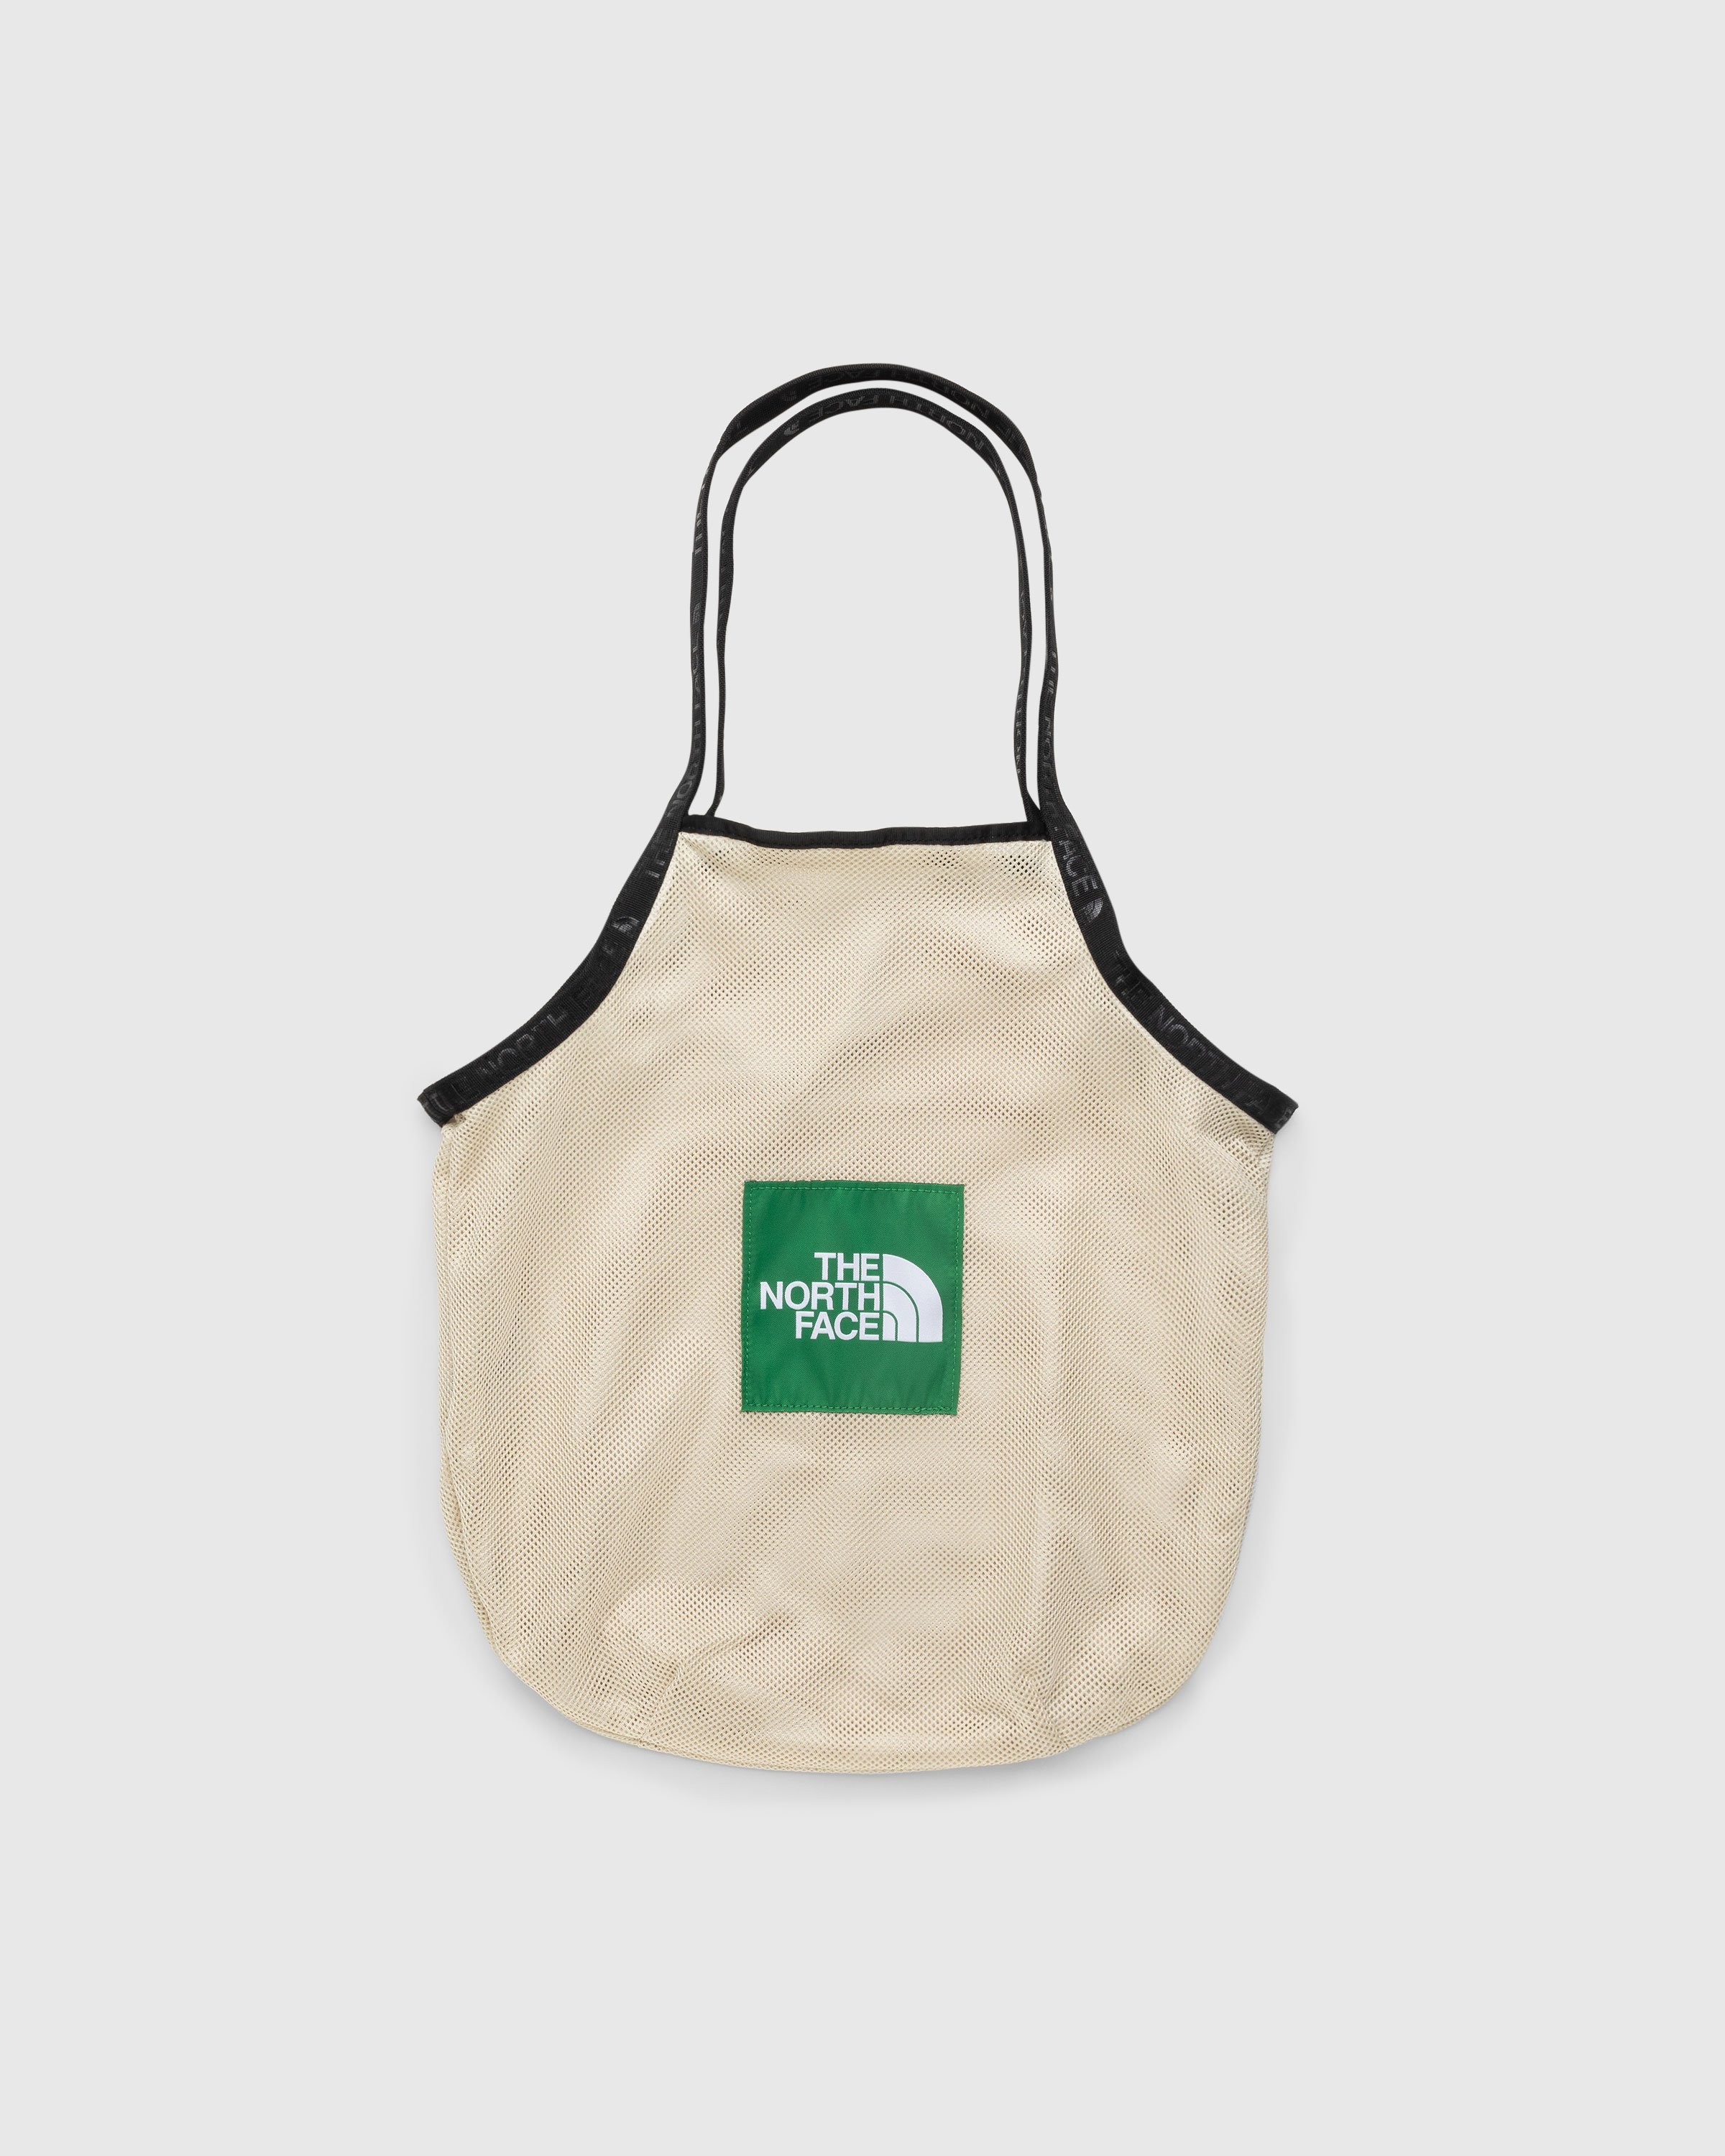 The North Face - Circular Tote Gravel - Accessories - Beige - Image 1